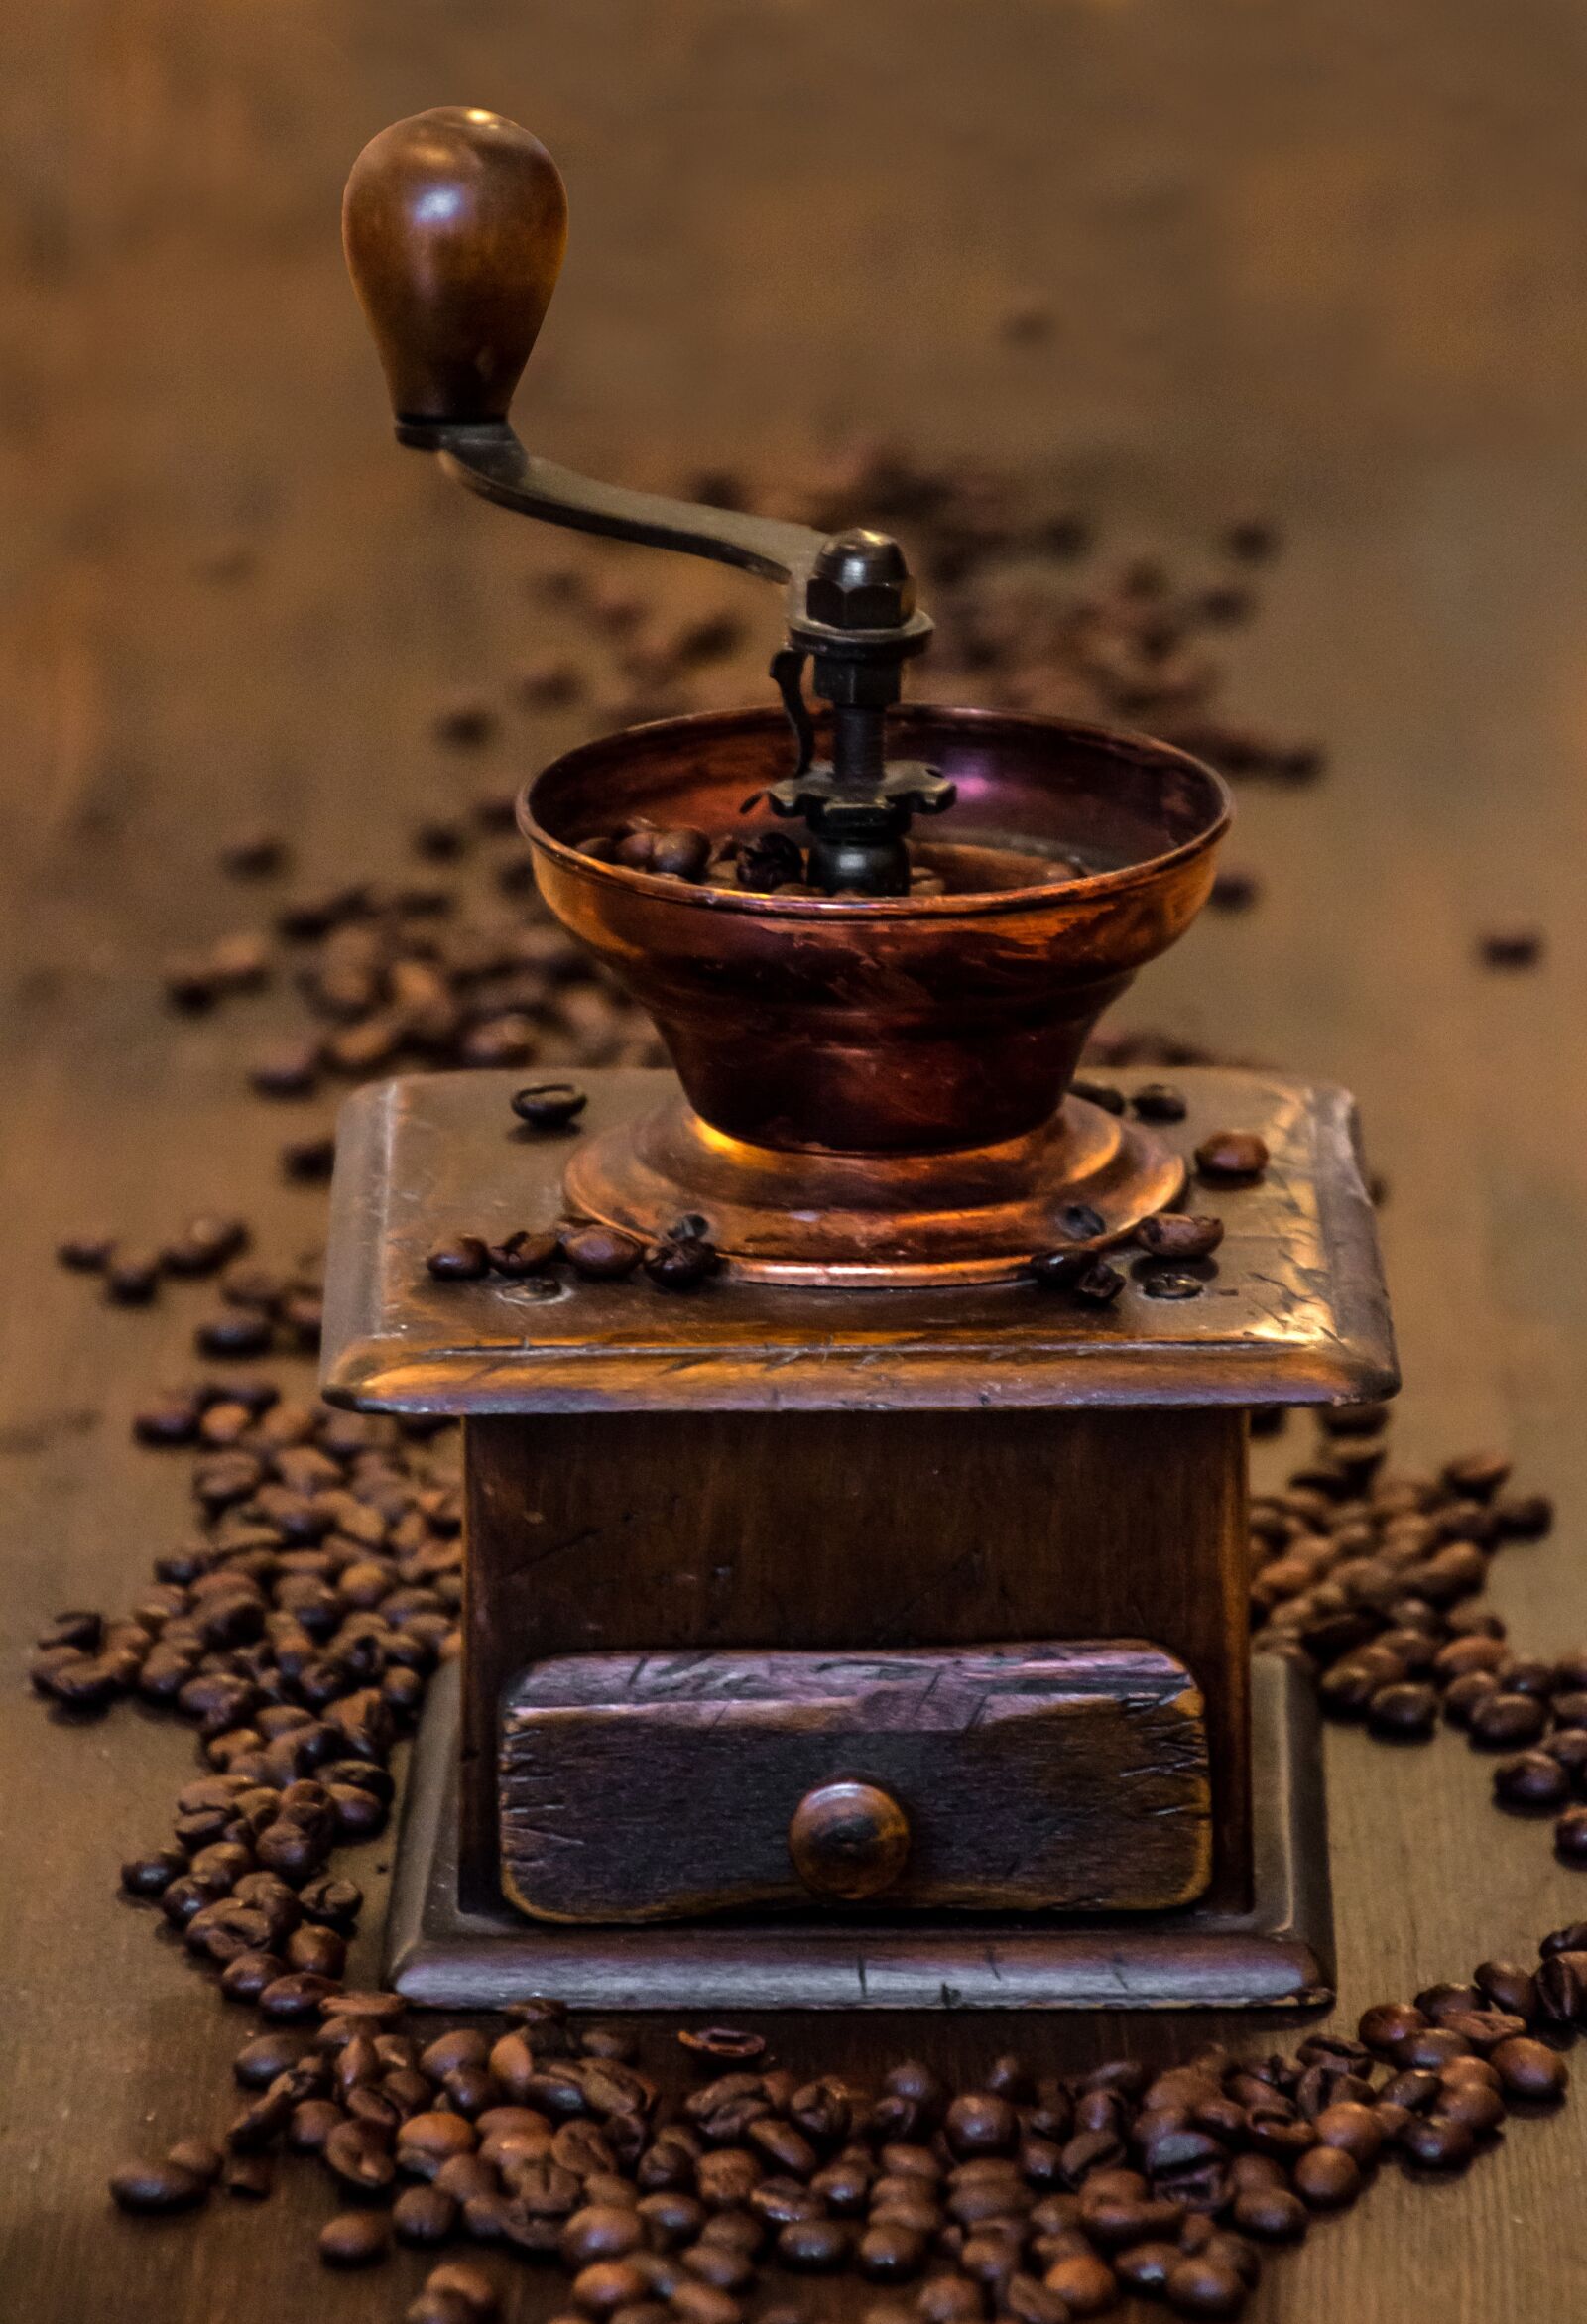 Canon EOS 70D + Tamron 16-300mm F3.5-6.3 Di II VC PZD Macro sample photo. Coffee, grinder, old coffee photography